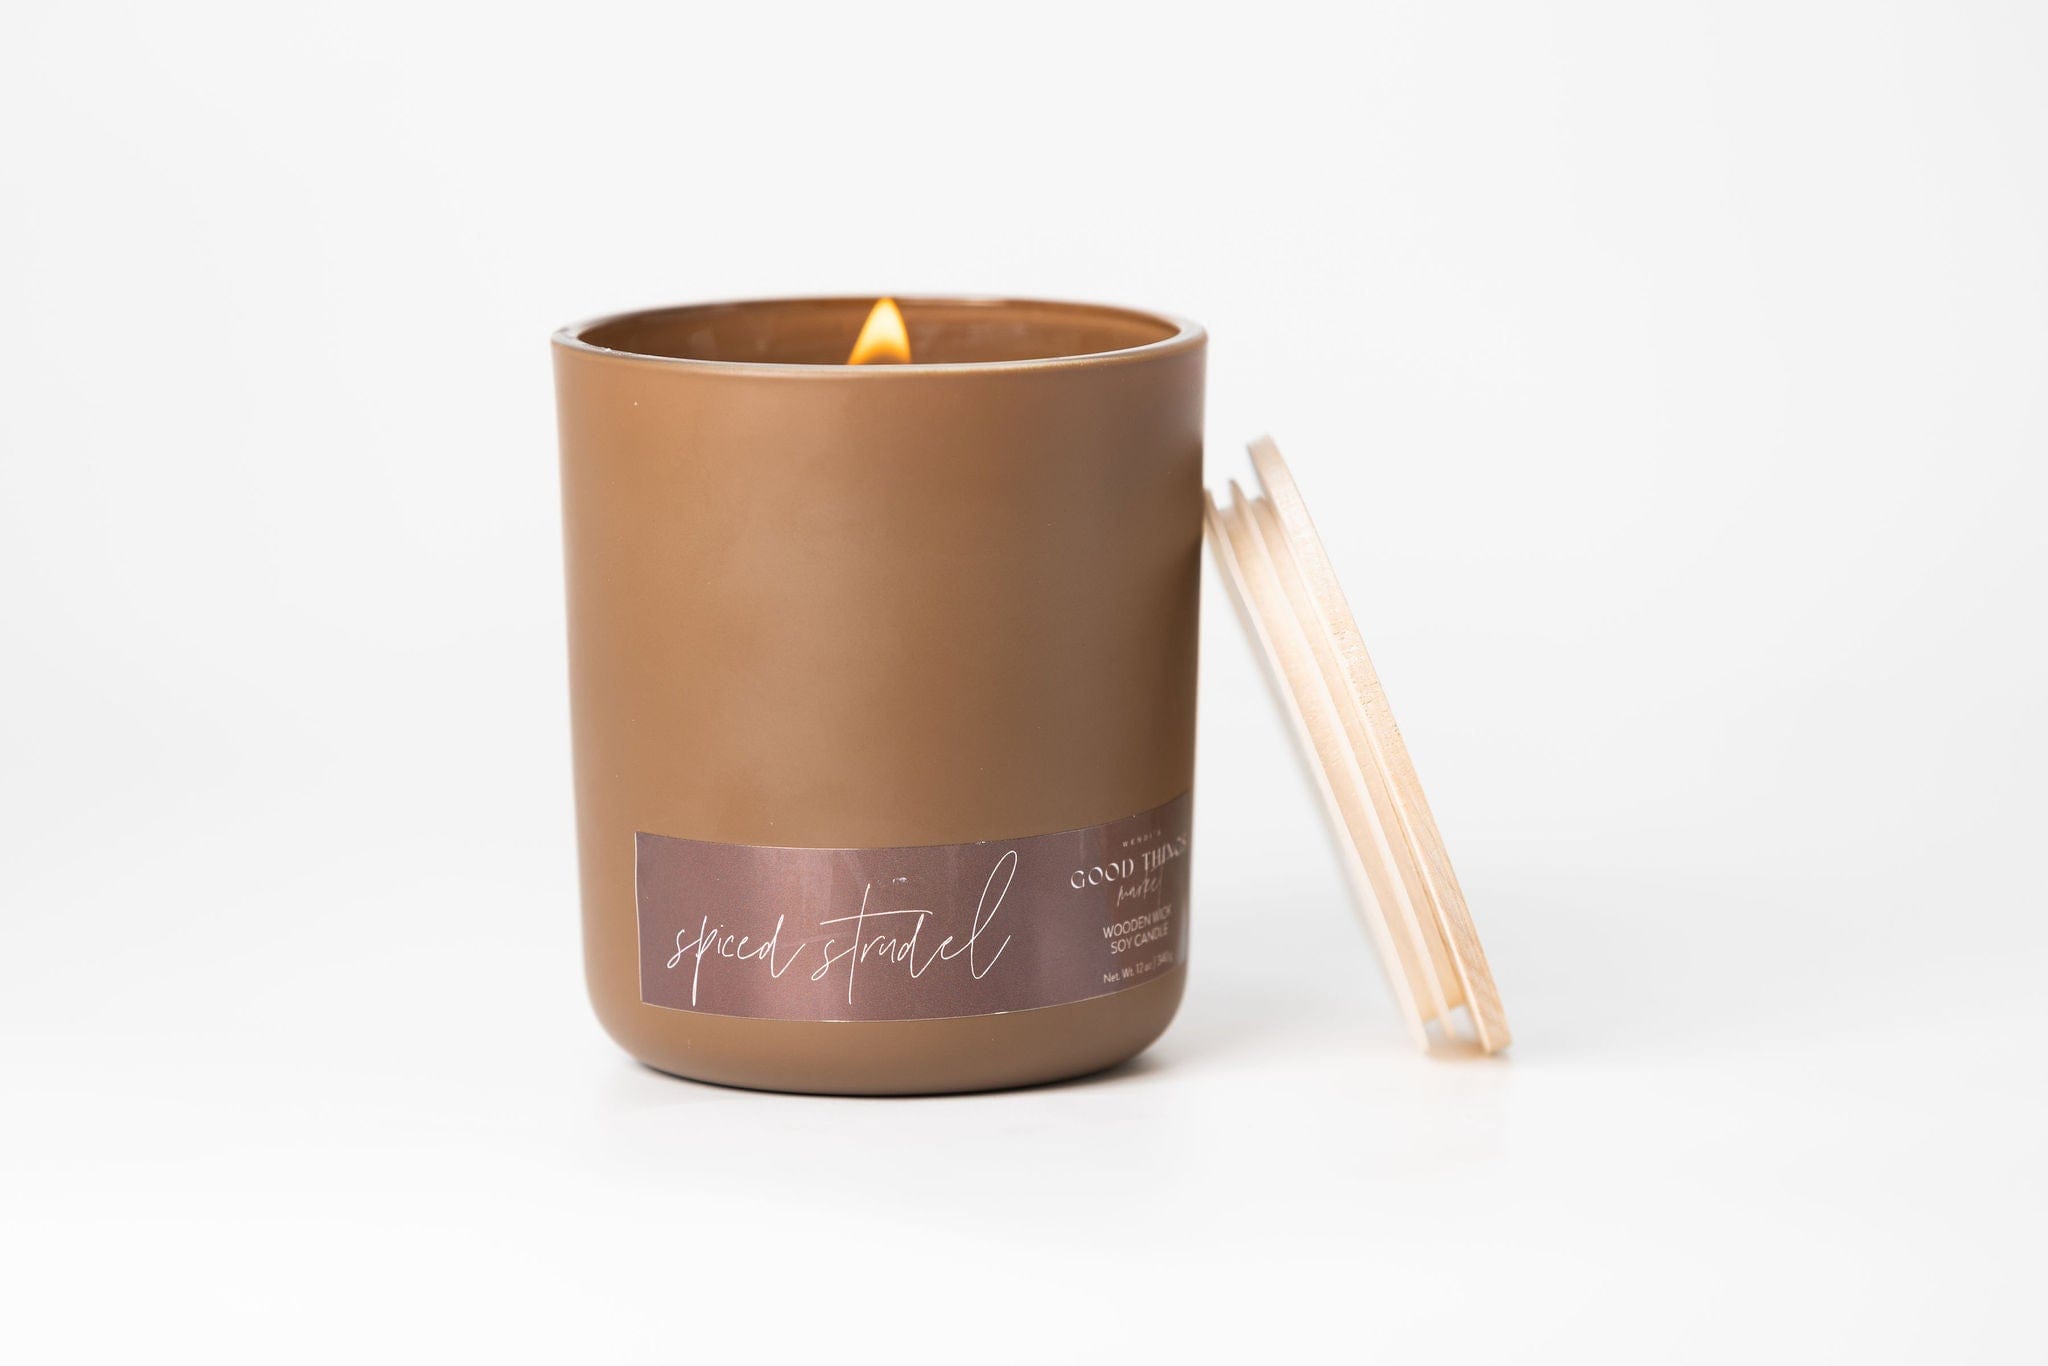 spiced strudel soy candle, Wendi's Good Things Market, made in Colorado